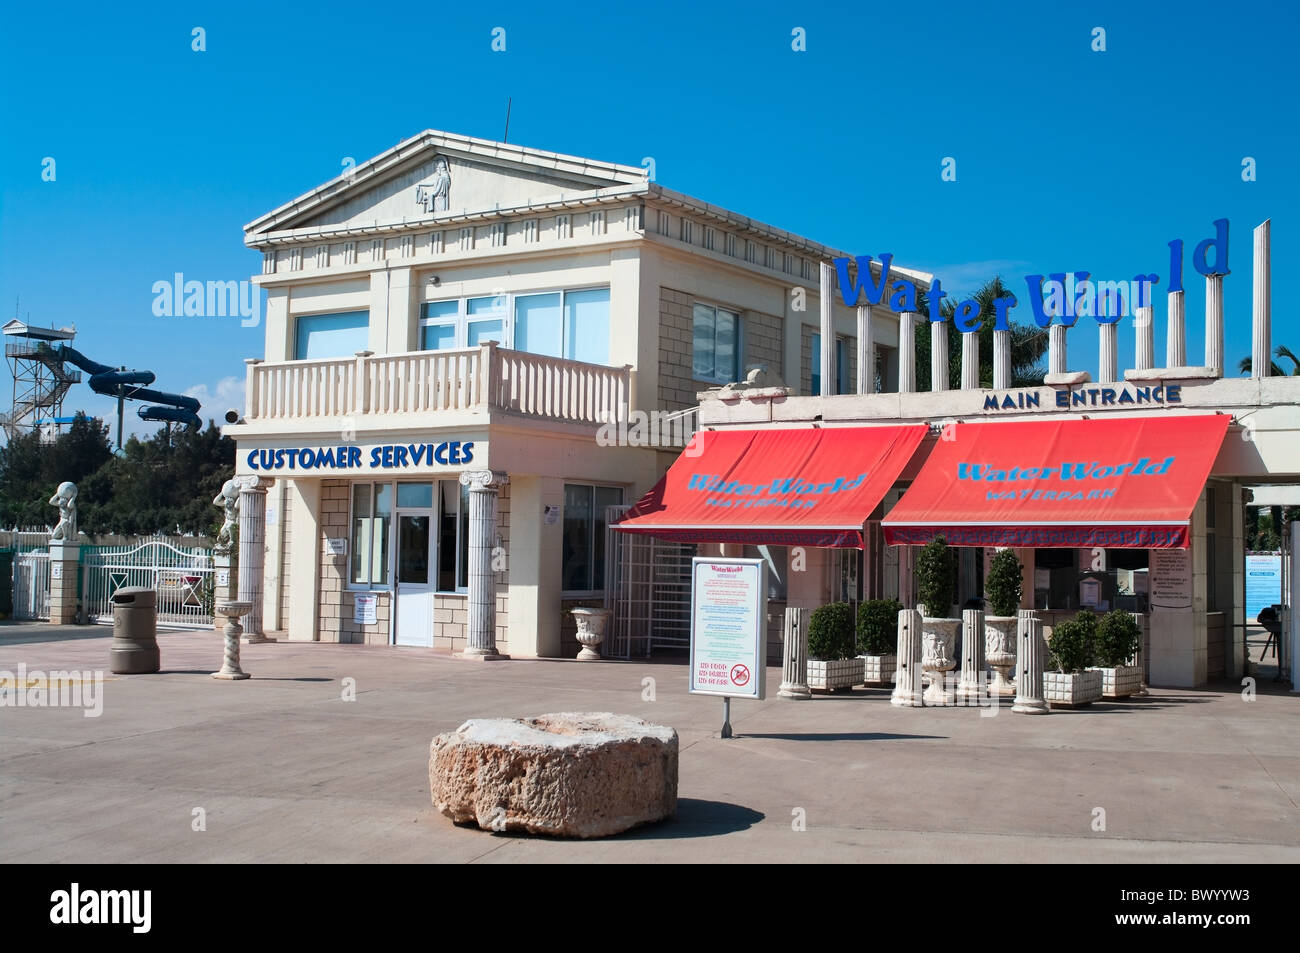 The main entrance to the water park Waterworld in Ayia Napa, Cyprus Stock Photo